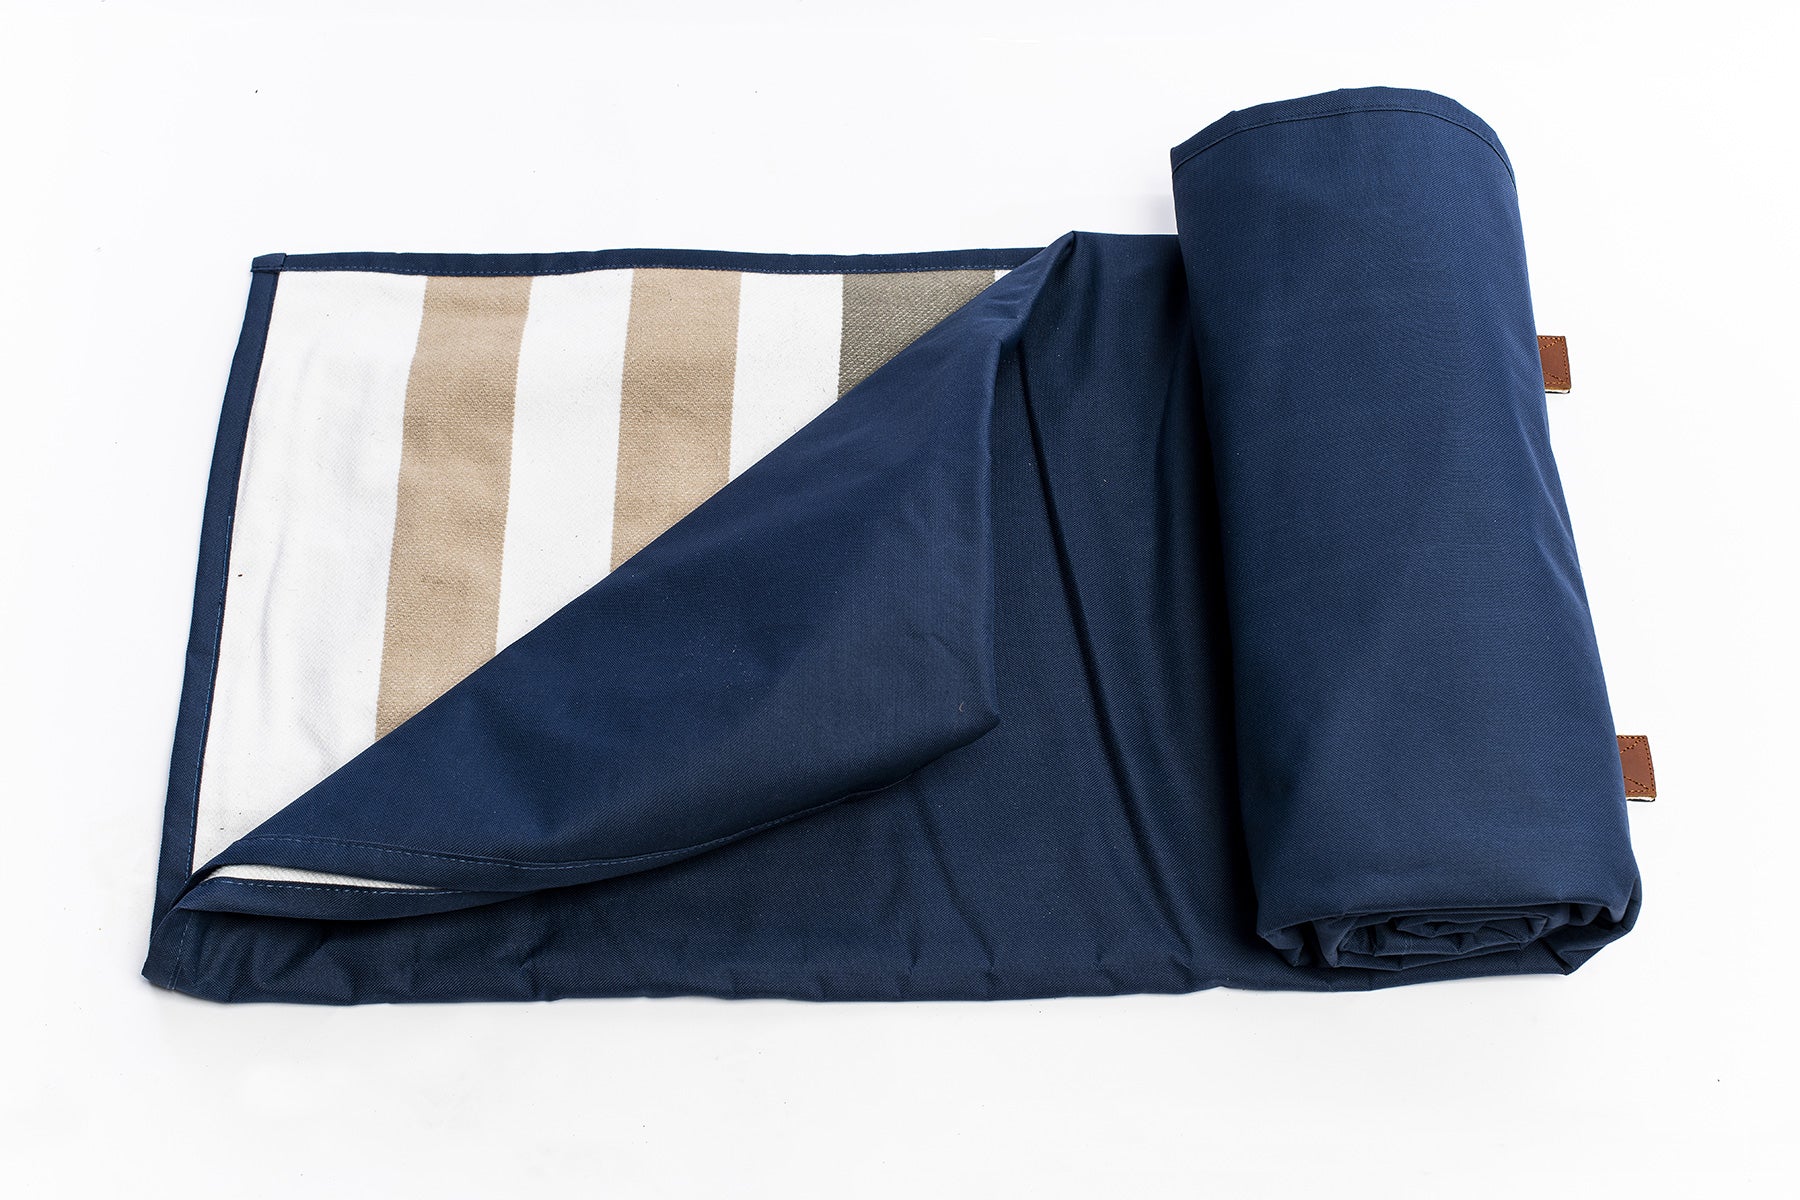 The Navy Slowlife Collection Picnic Rug unrolled slightly to show a bit of the inside patten (cream and olive stripe) of the rug. 